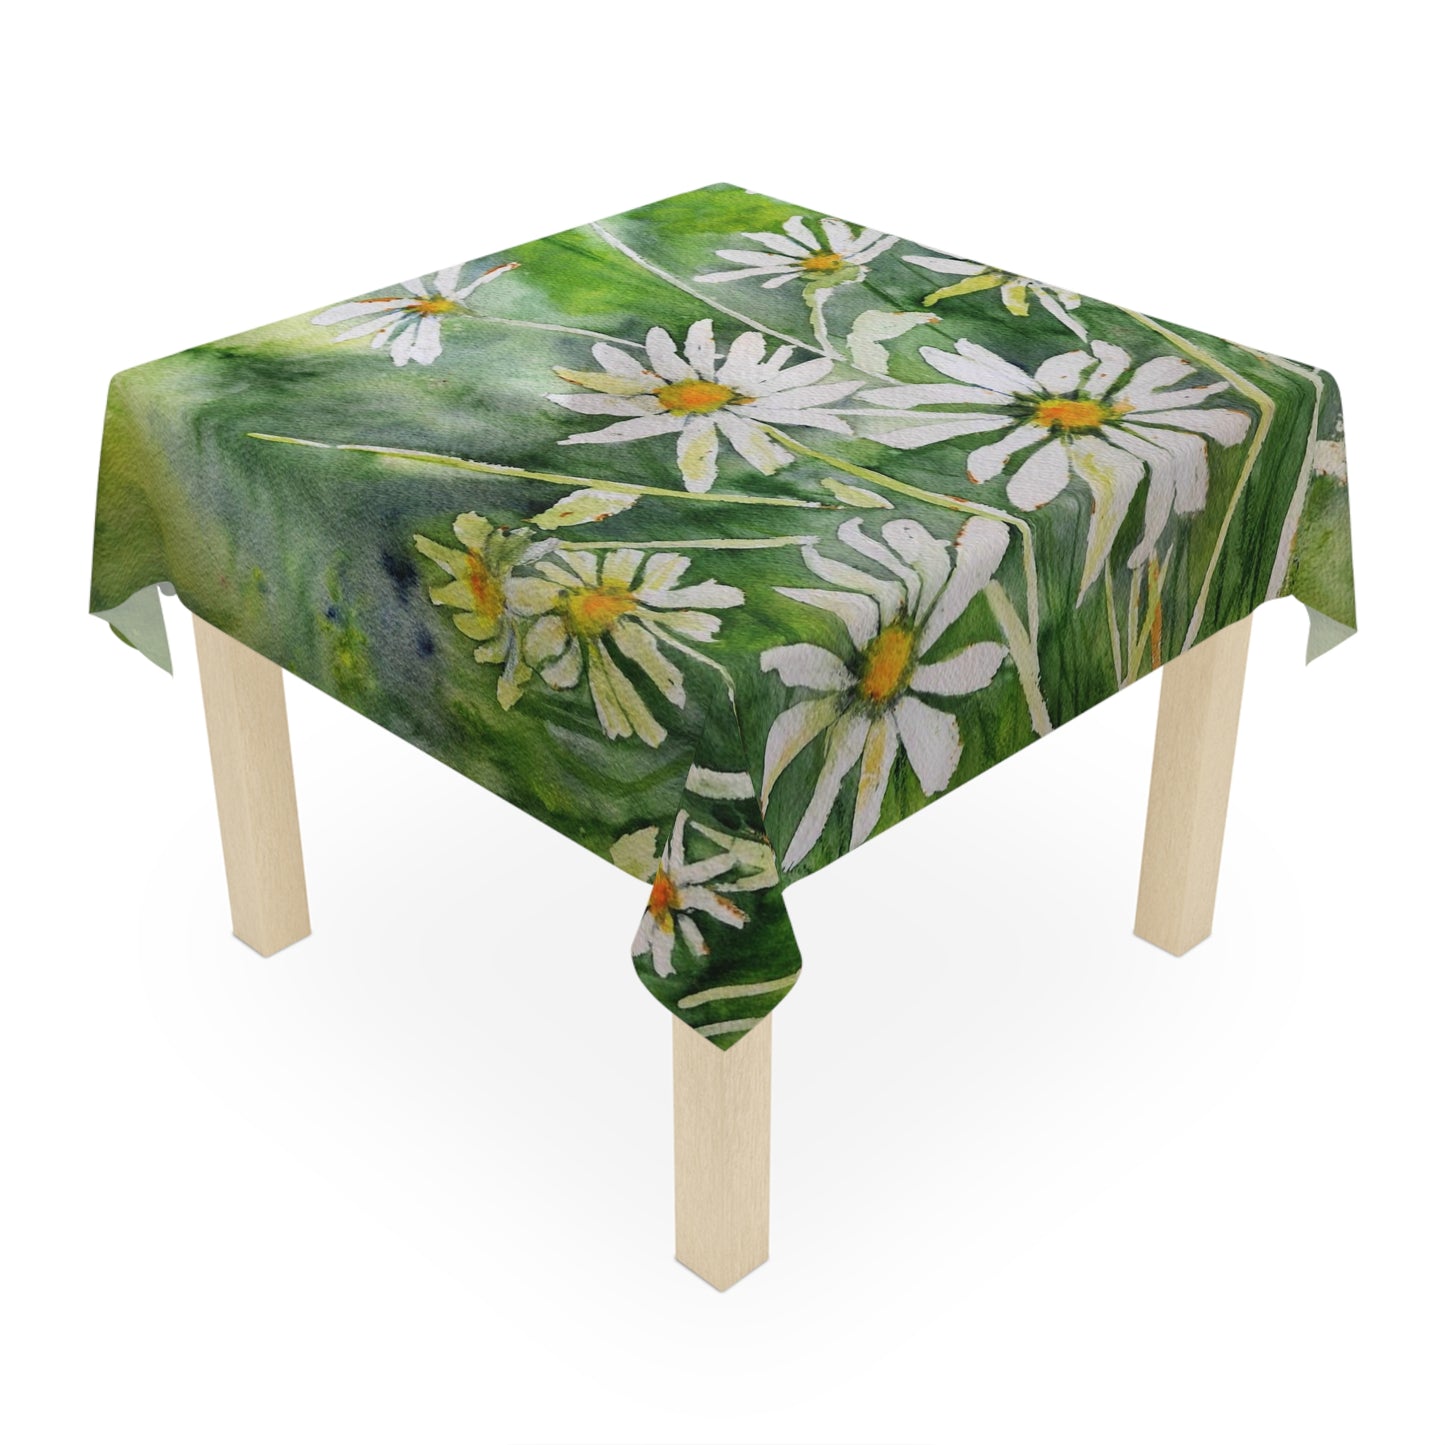 Dodie's Daisies Tablecloth